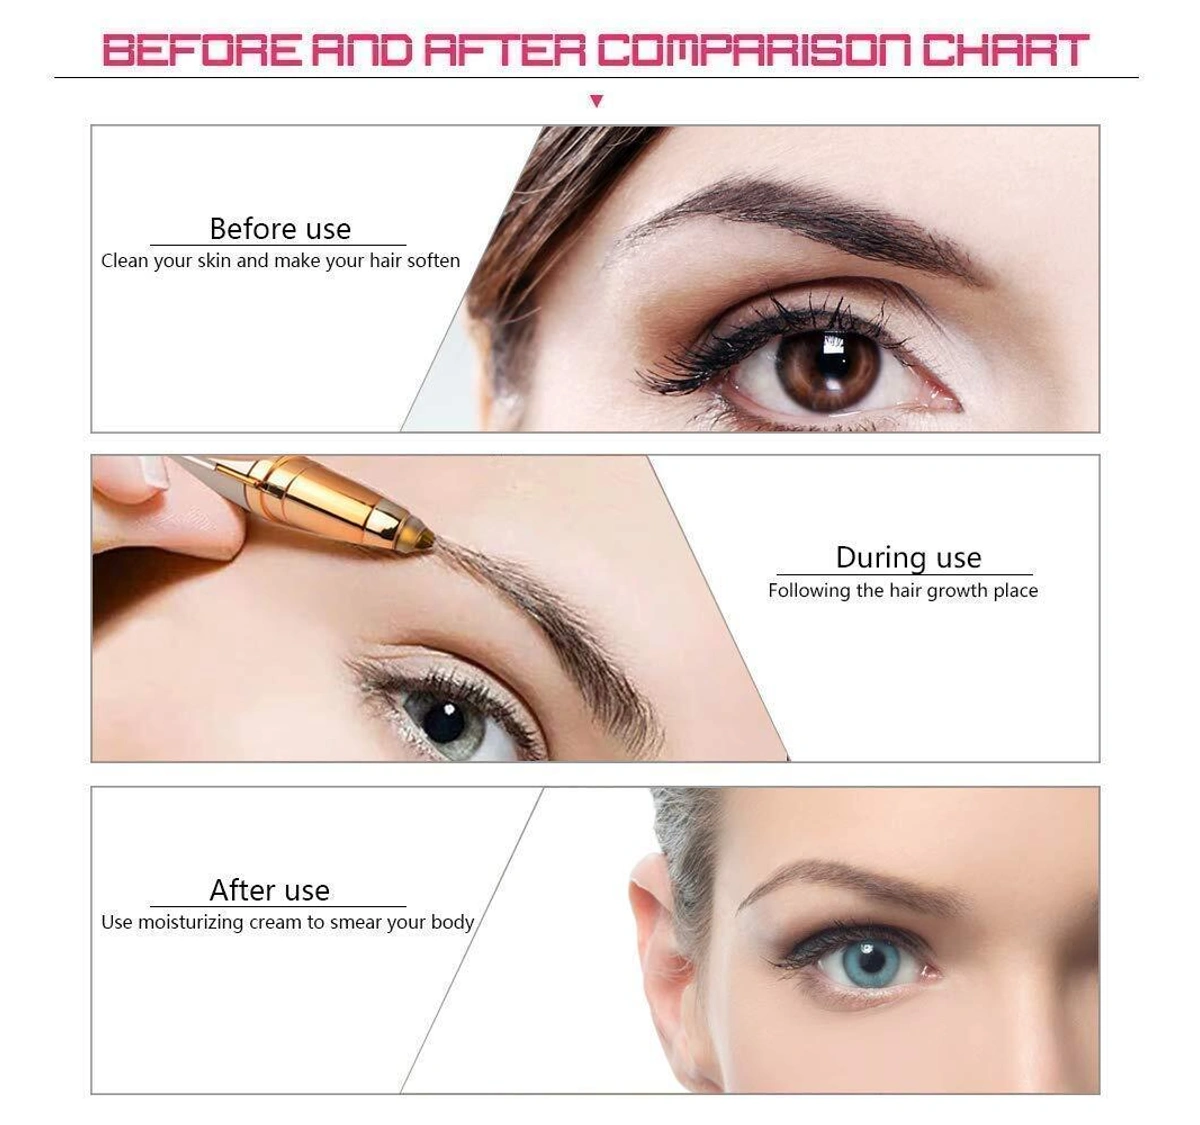 Womens Electric Eyebrow Shaper Facial Hair Remover Brows Trimmer